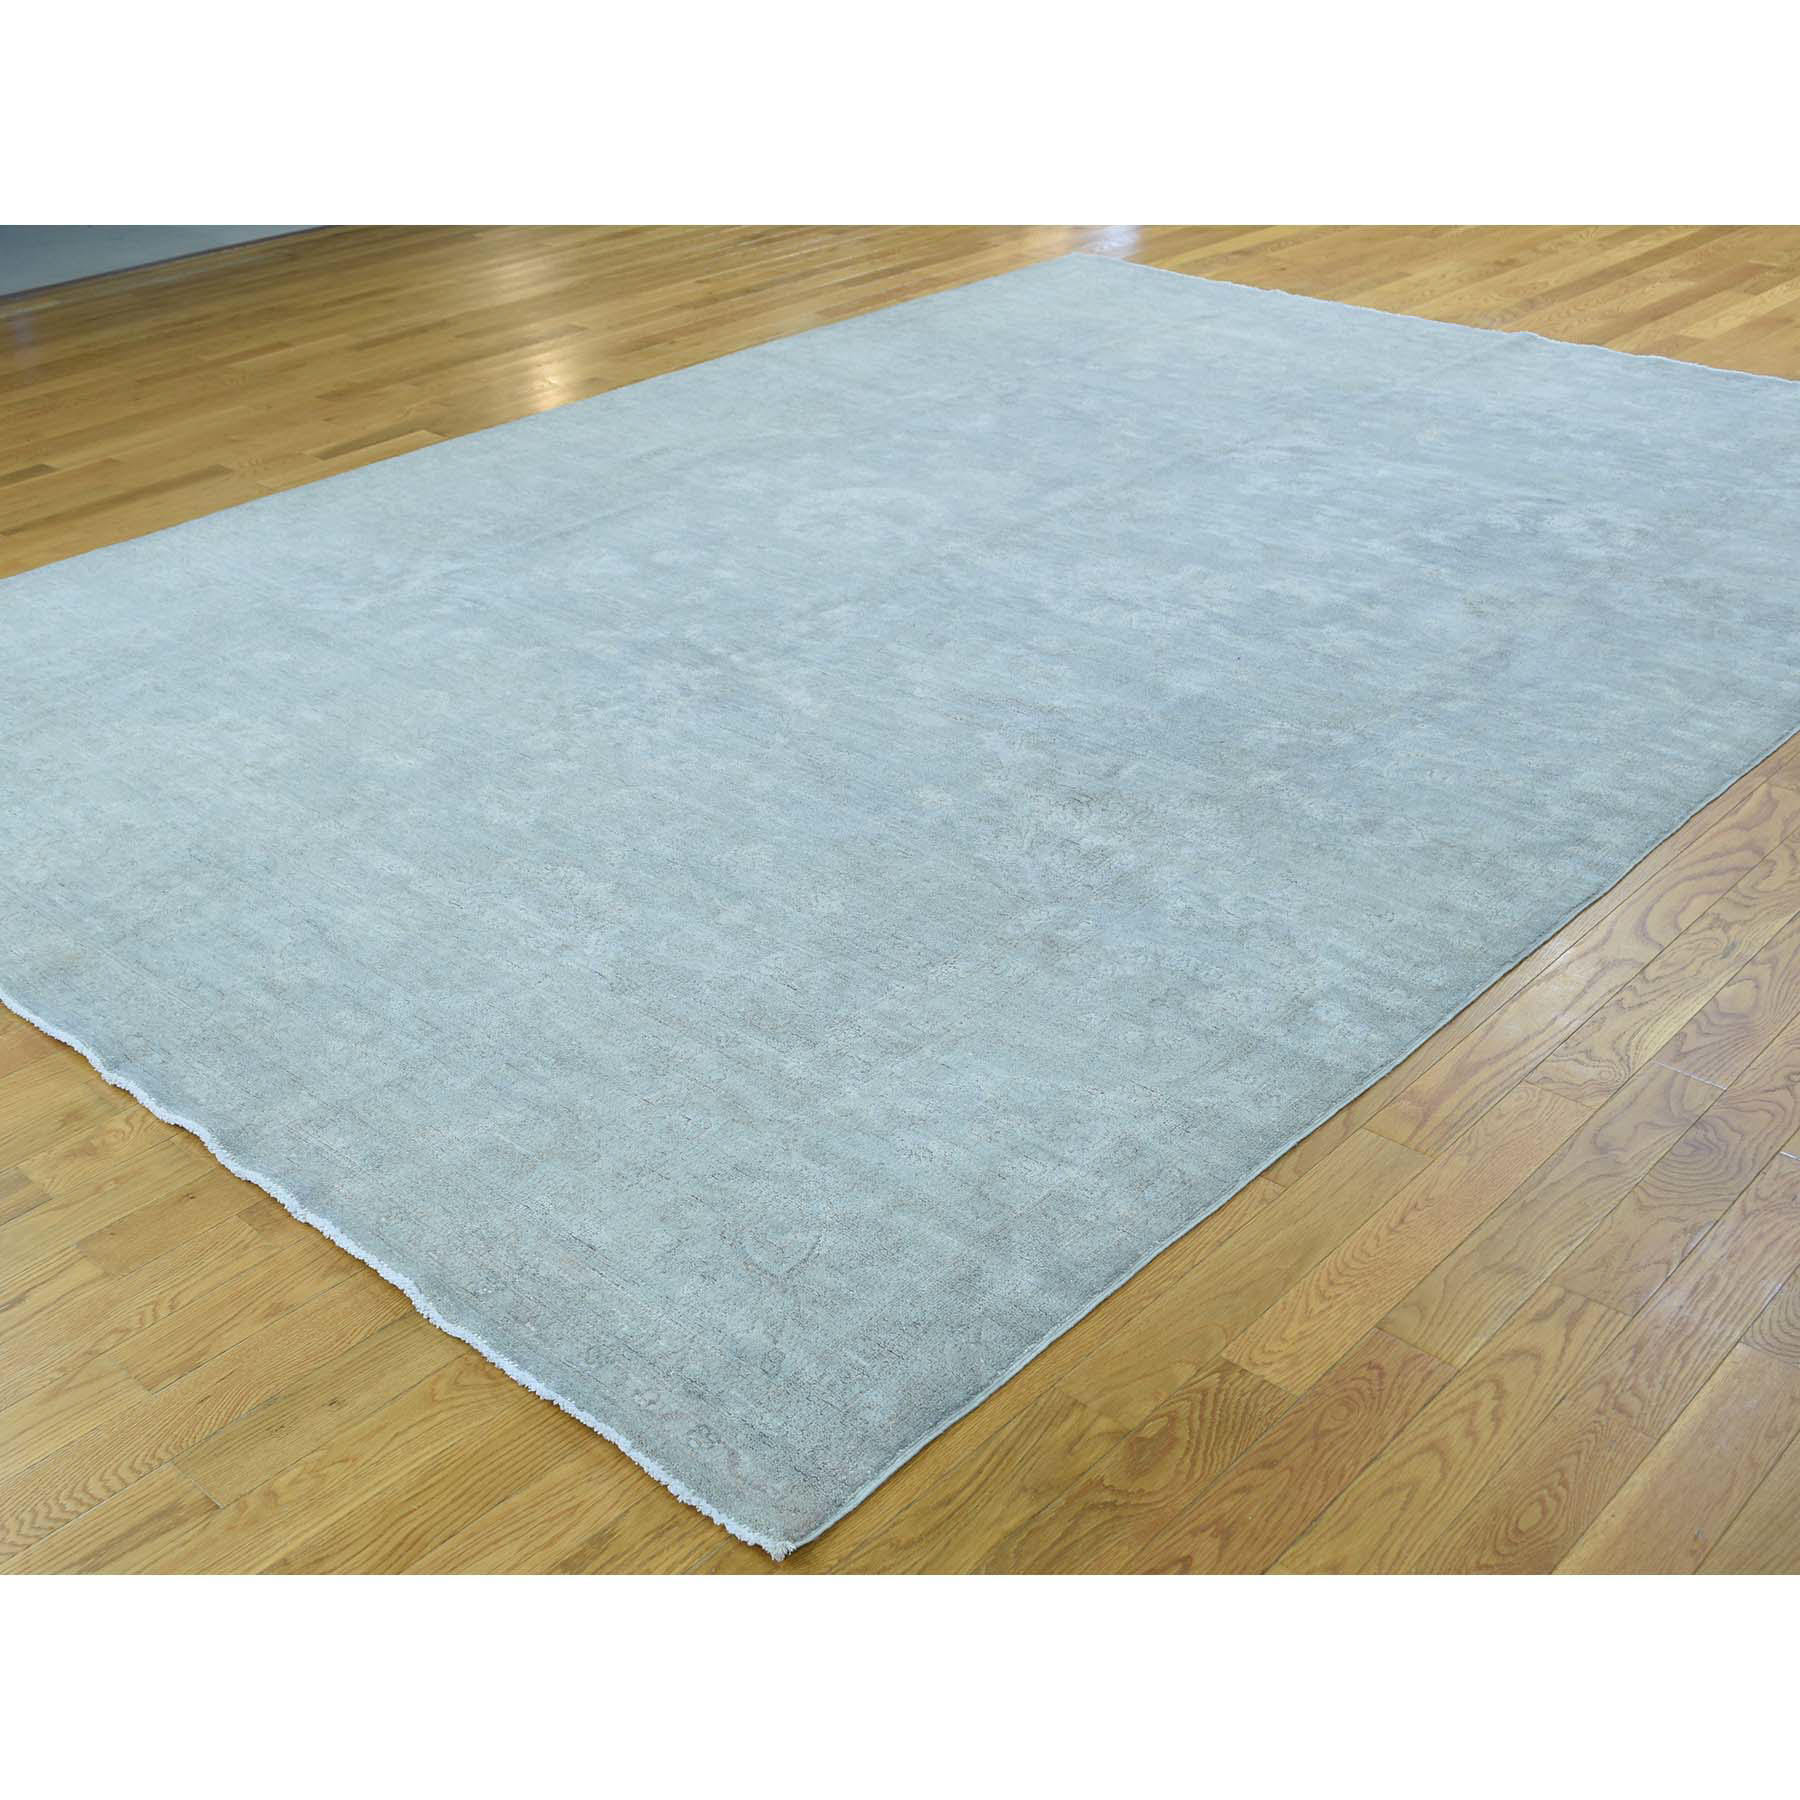 8-6 x11-7  Pure Wool Silver Wash Peshawar Hand-Knotted Persian Rug 